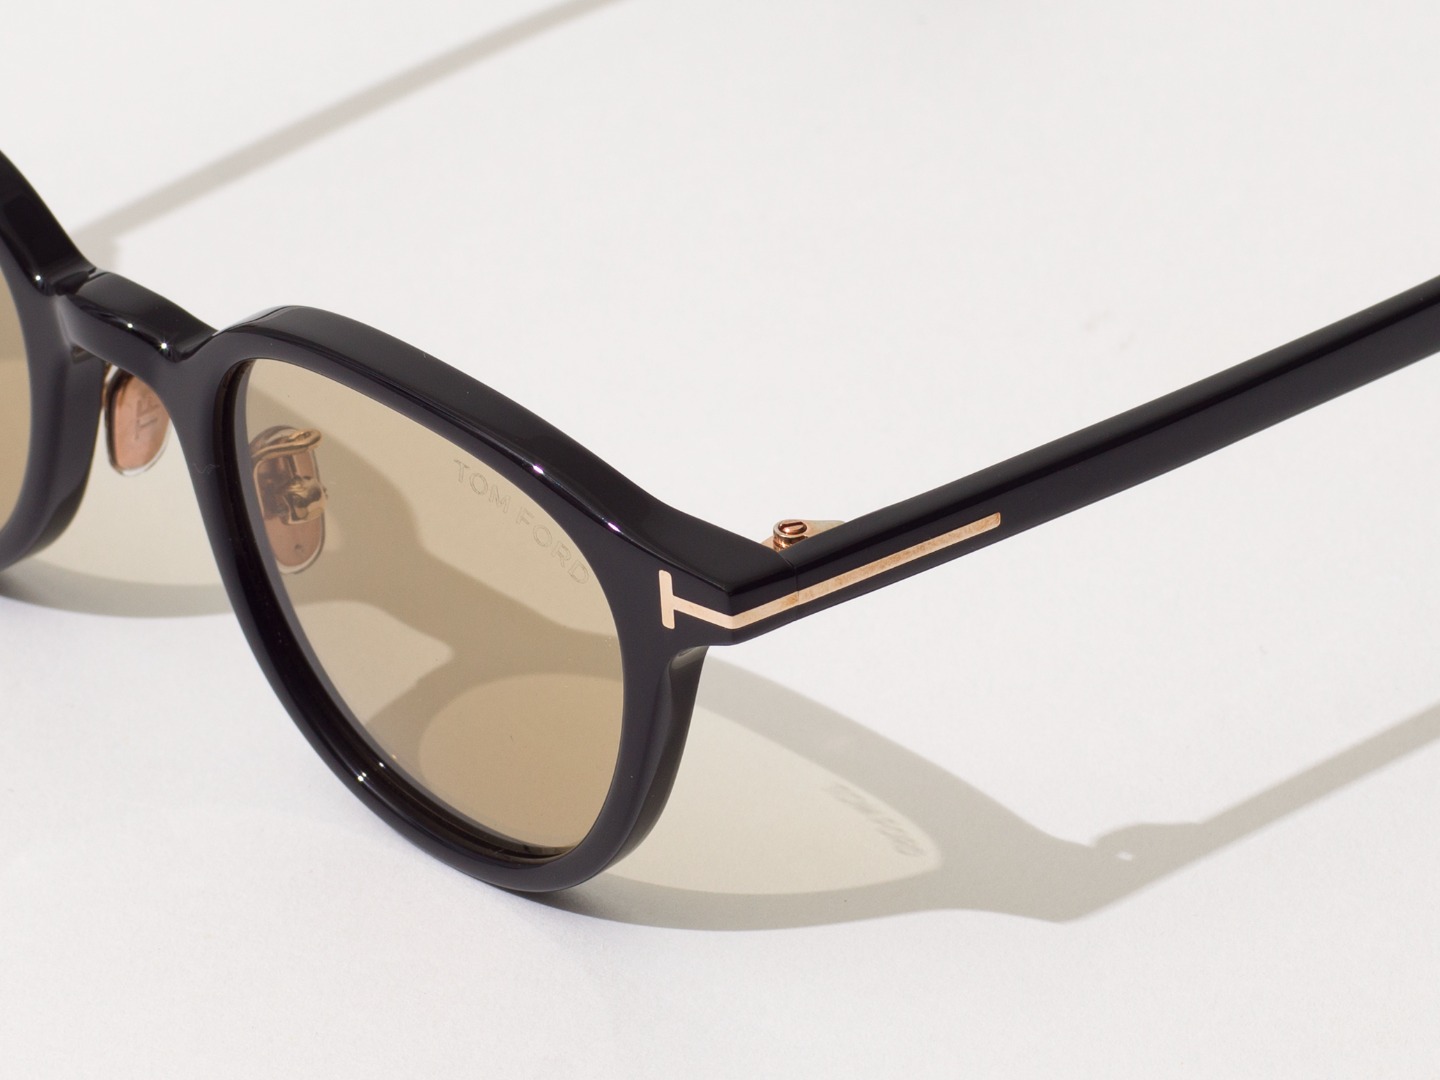 TOM FORD EYEWEAR Exclusive for Ron Herman 12.10(Sat) New Arrival